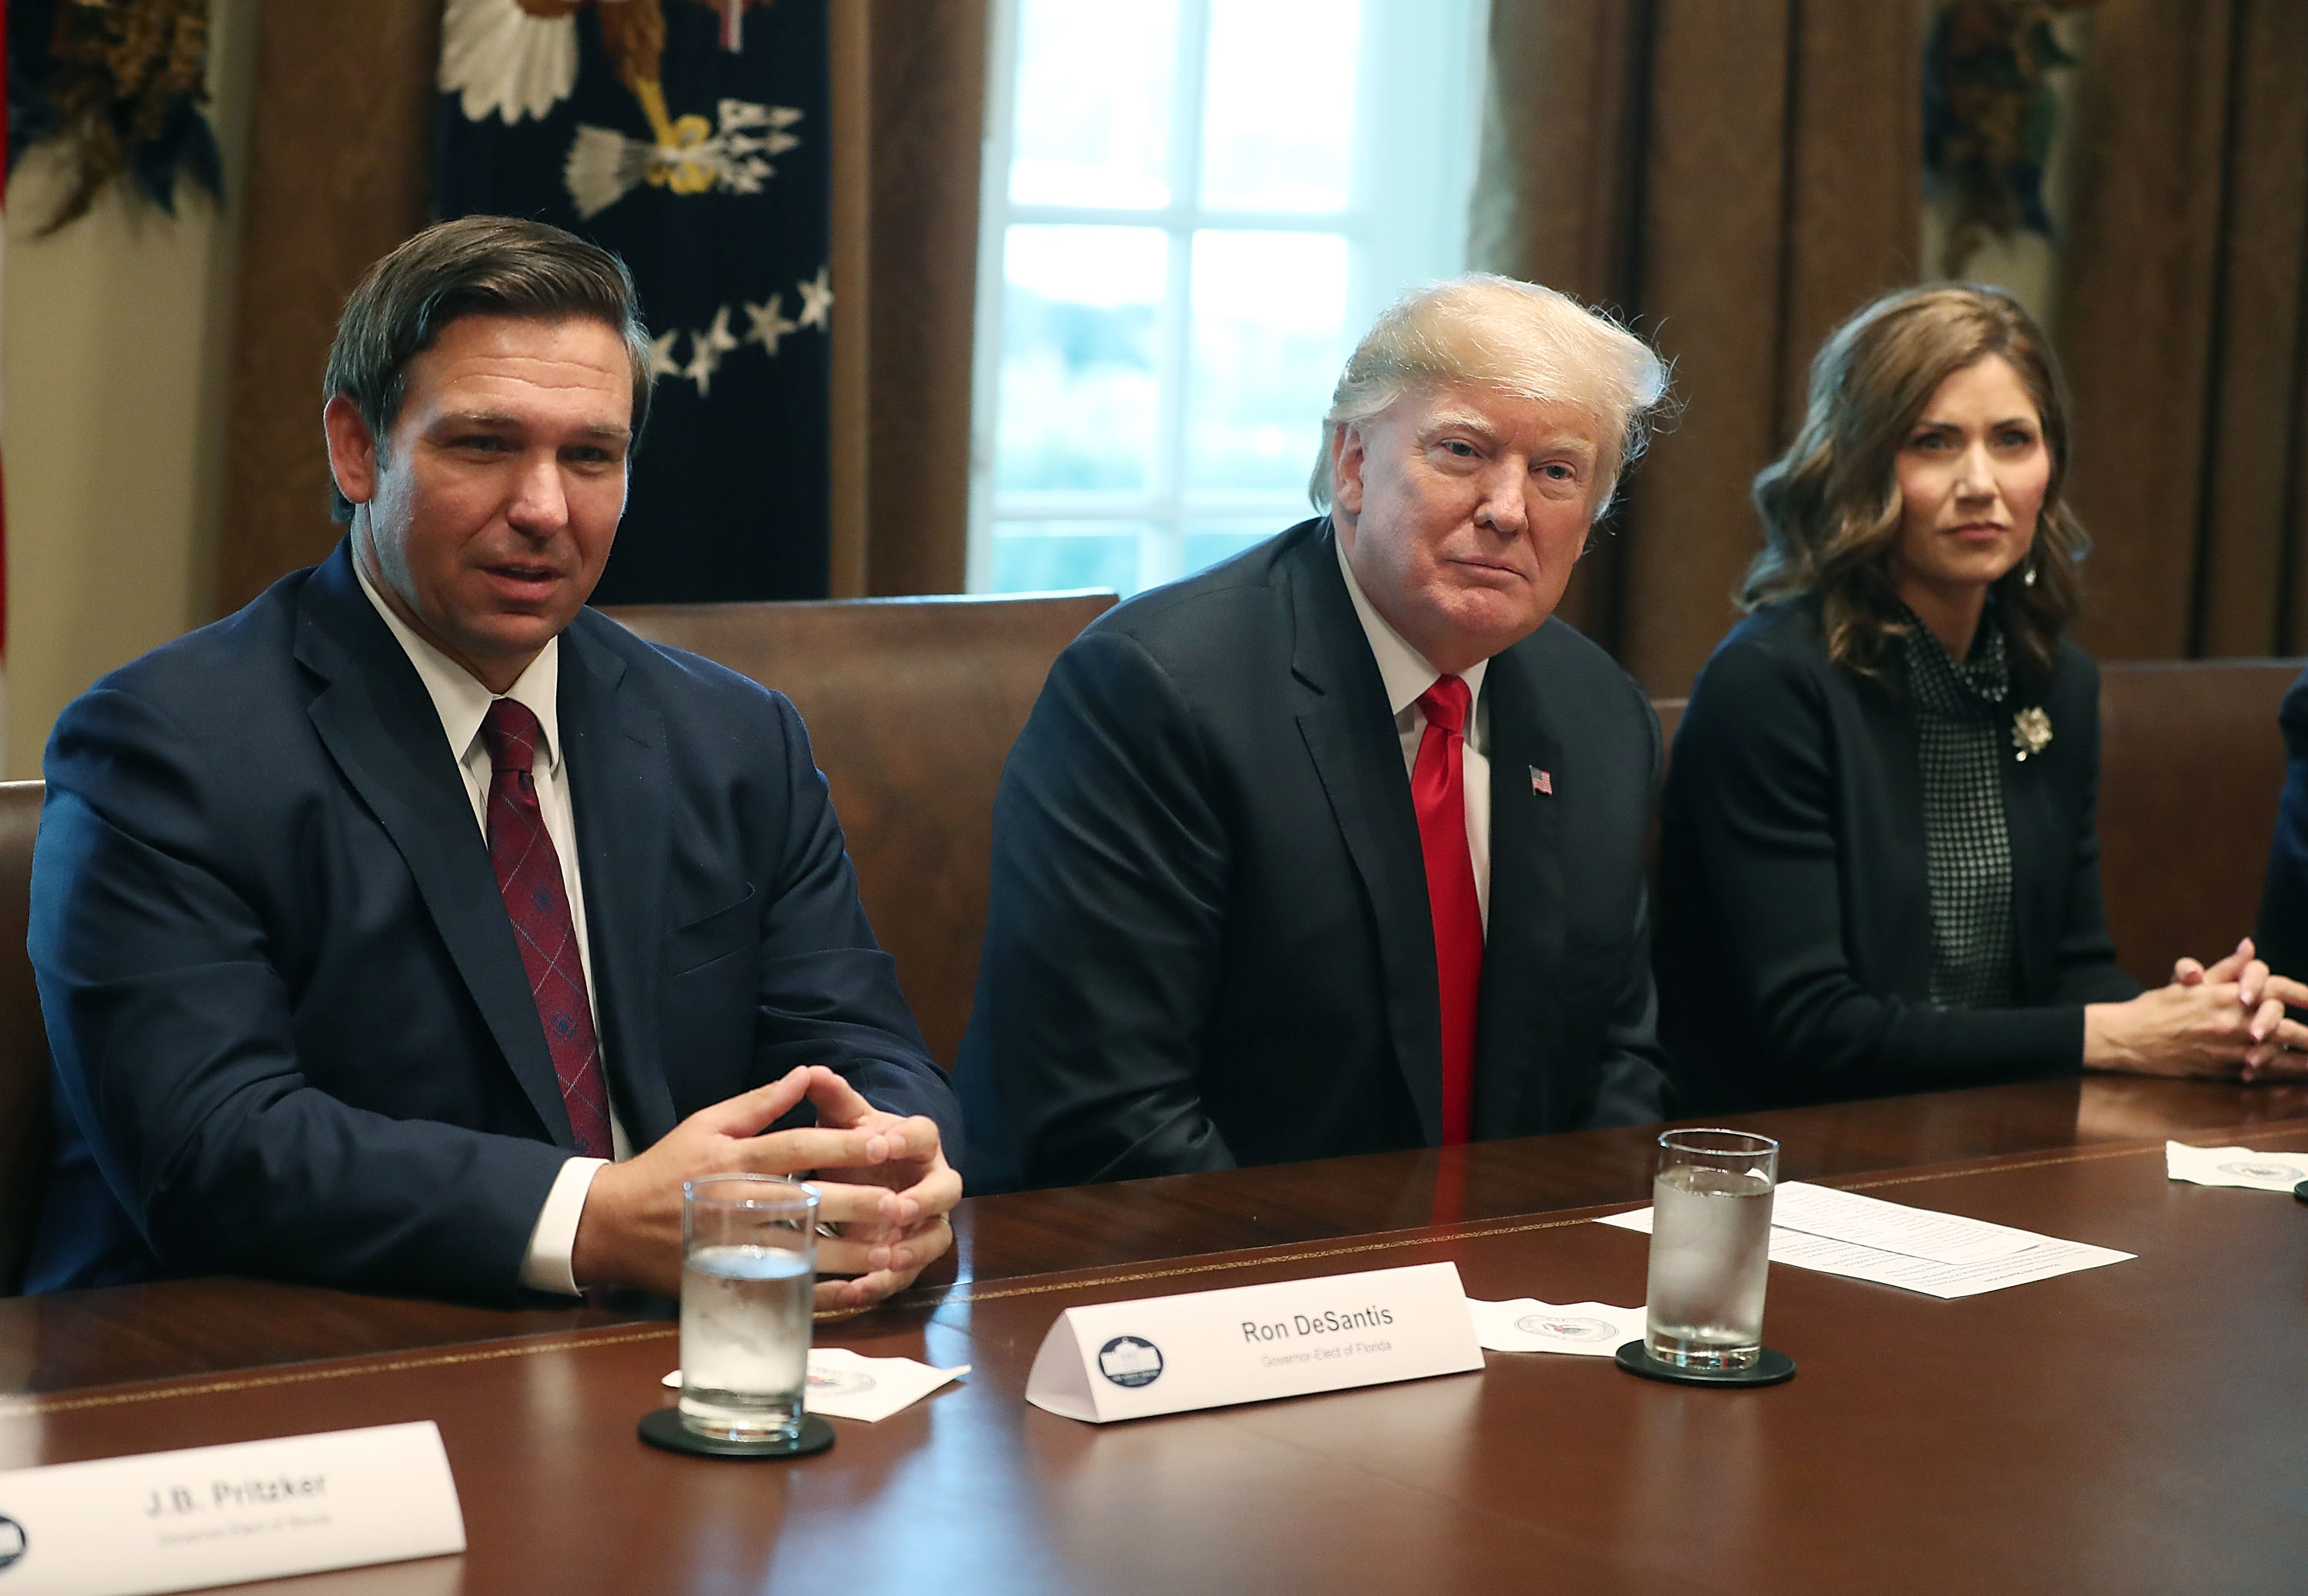 Ron DeSantis, Donald Trump, and Kristi Noem sitting at a conference table